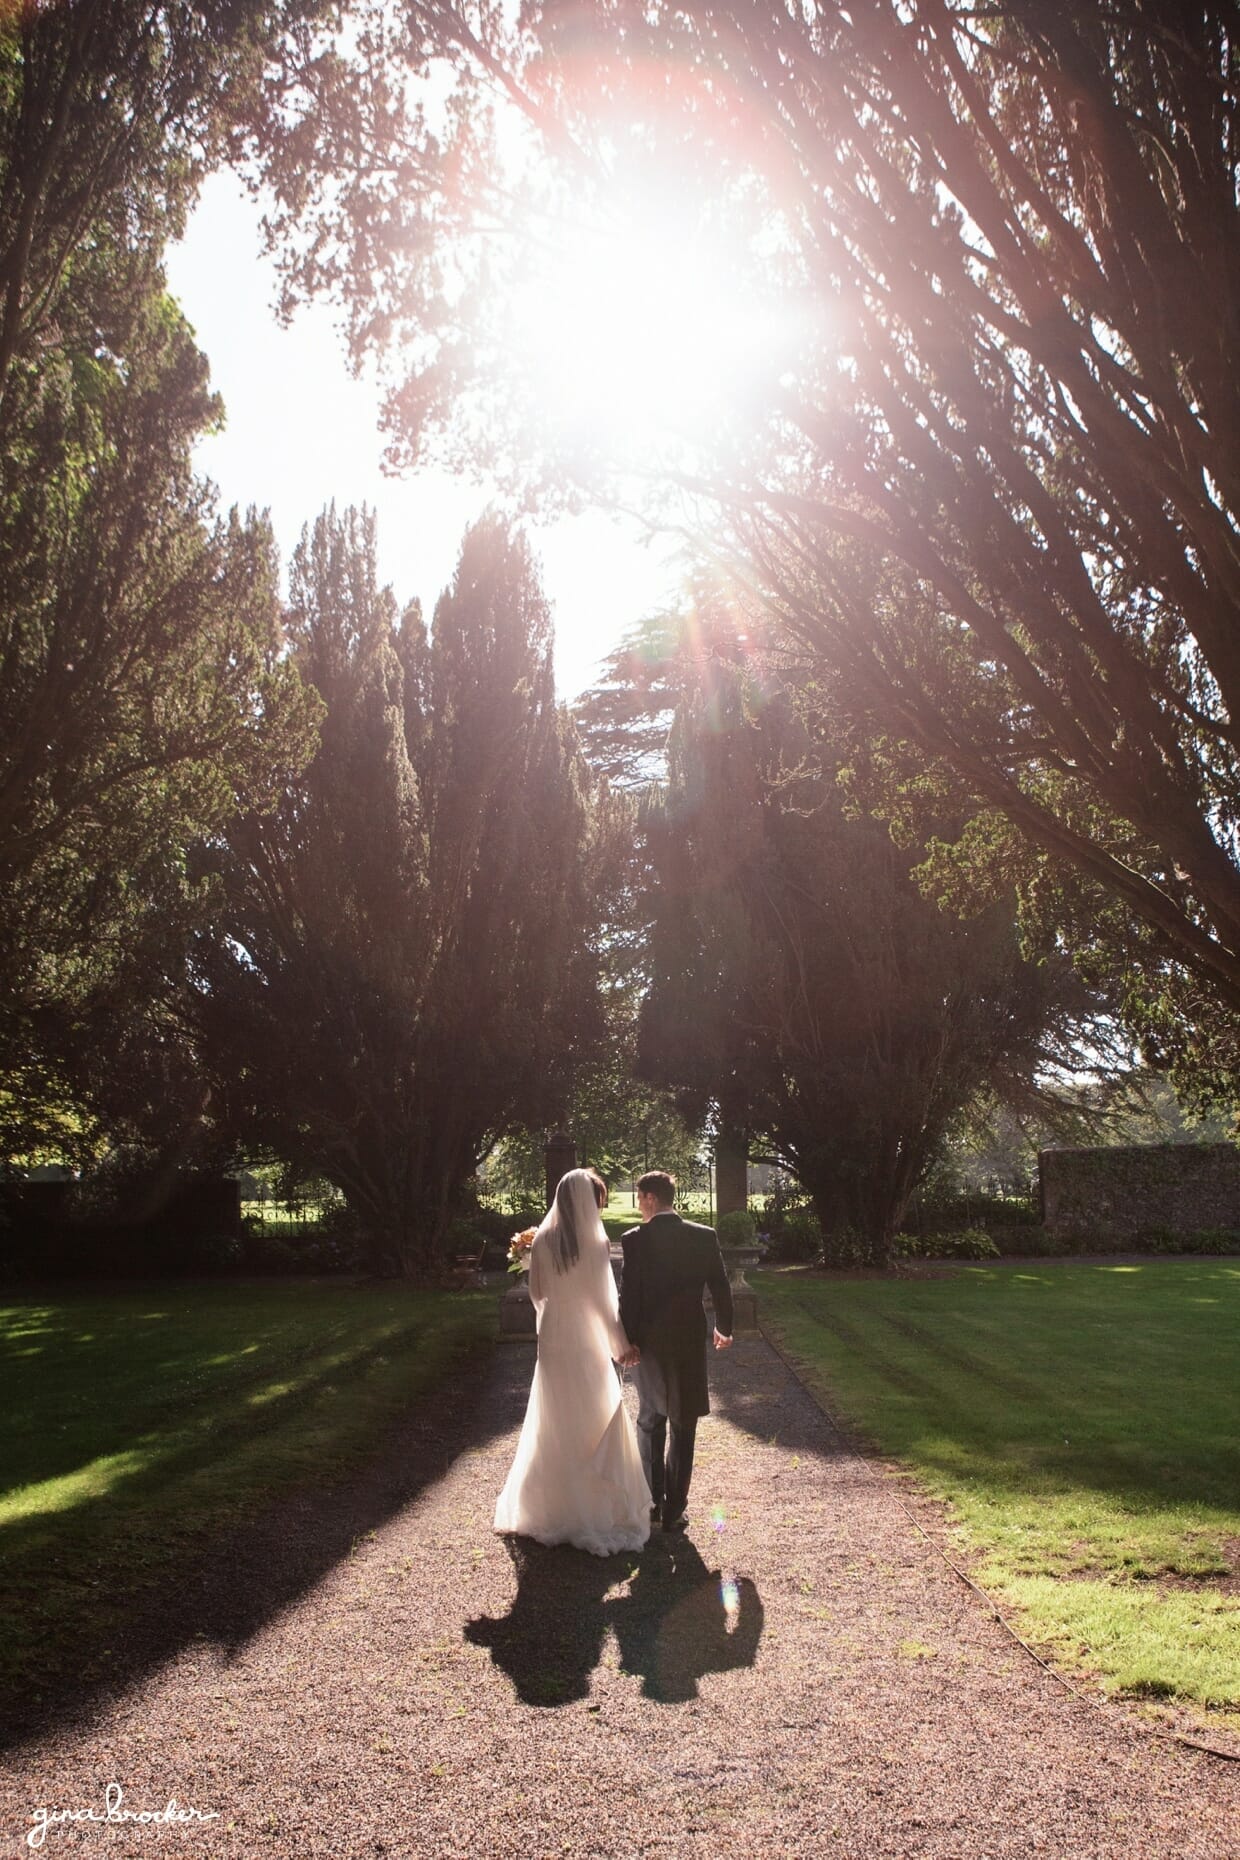 A beautifully lit wedding portrait of the bride and groom walking away in the sunset